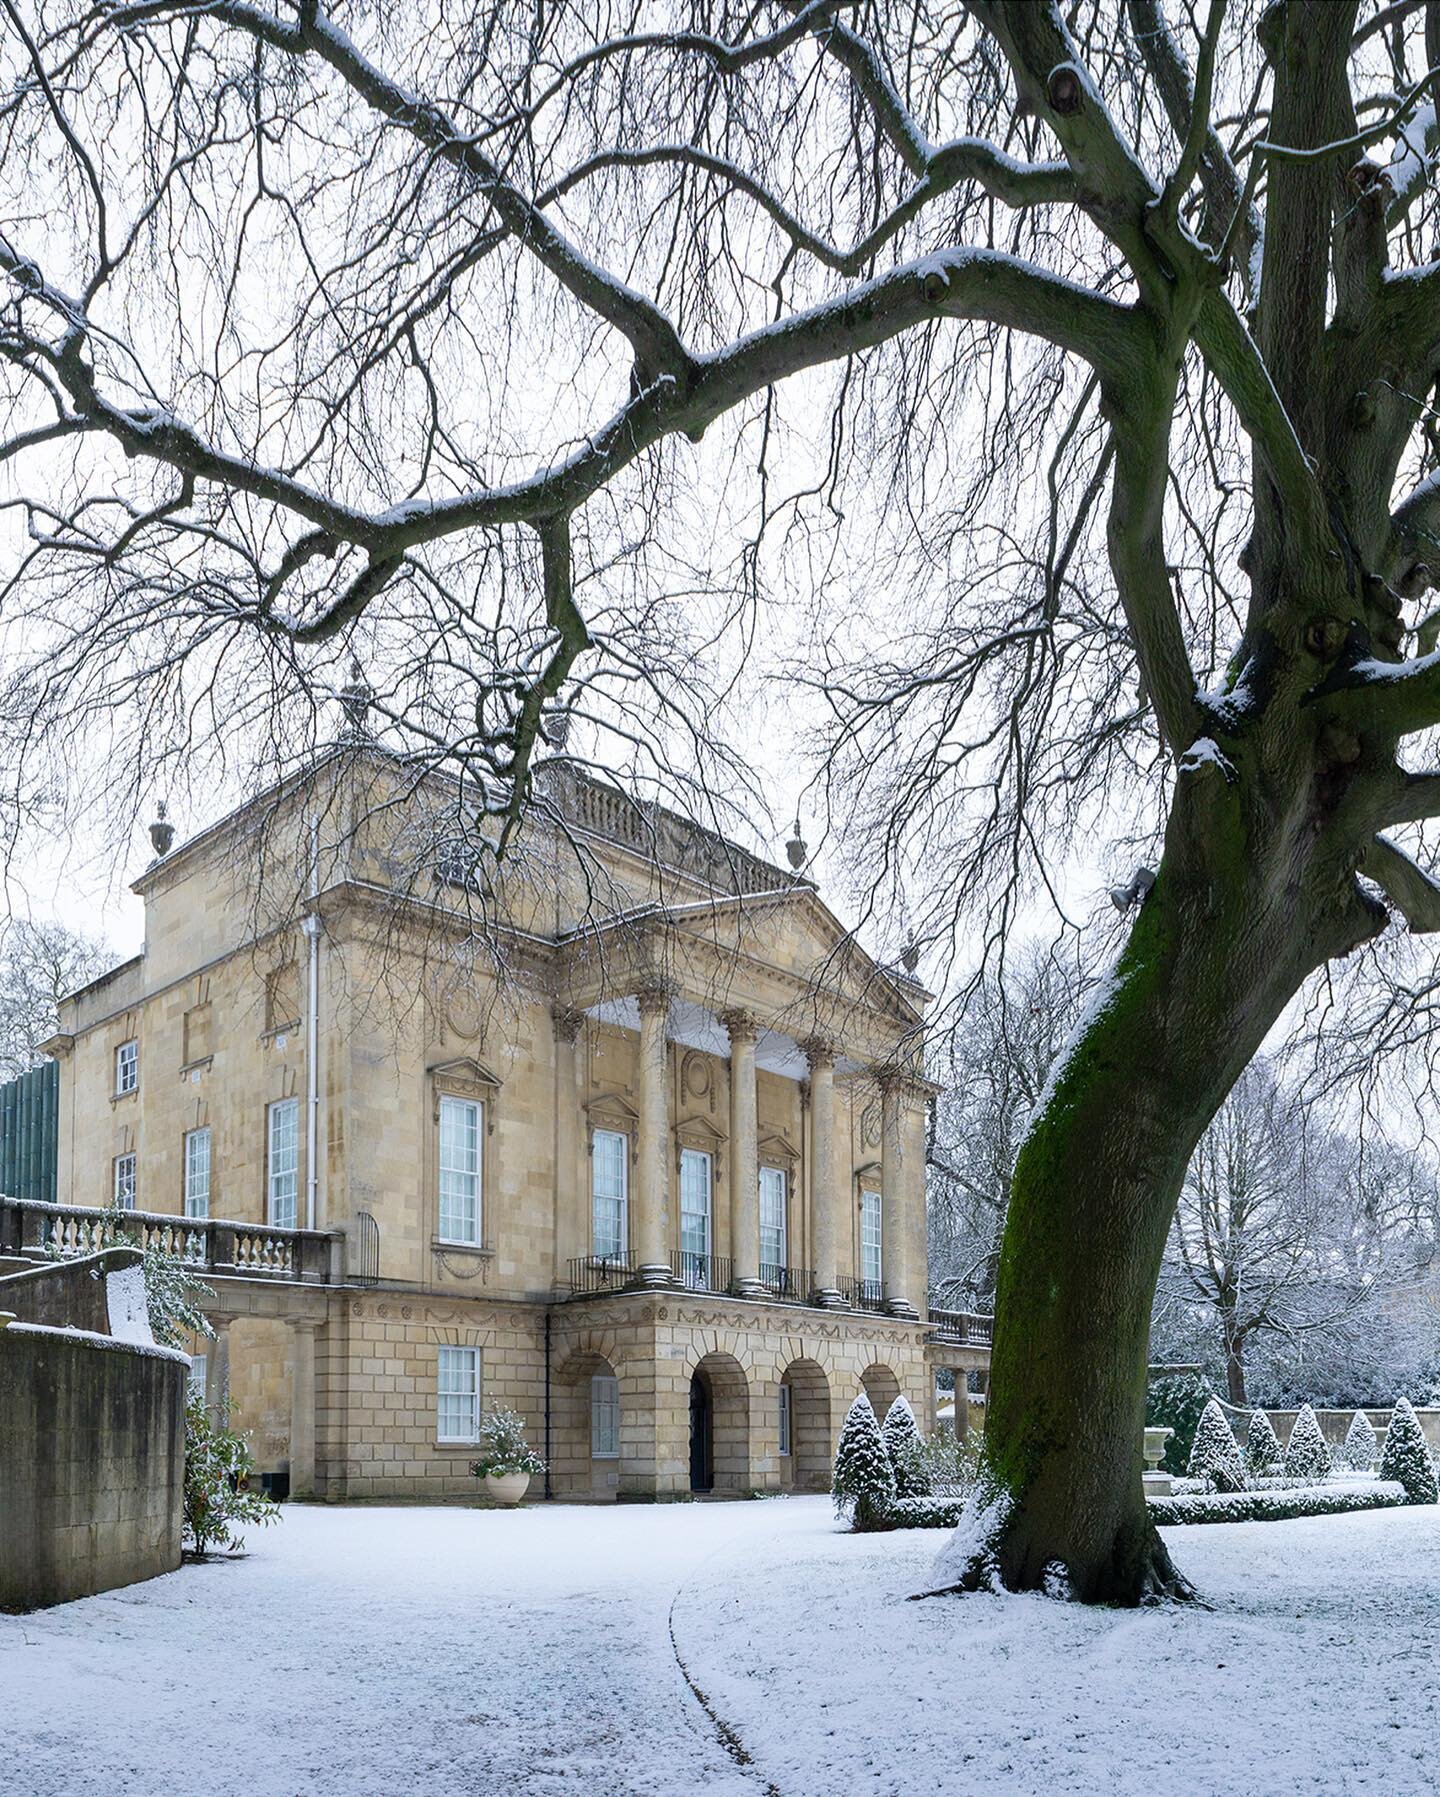 Bath&rsquo;s beauty increases under a layer of crisp white snow and with a hint of something in the forecast next week we could see scenes like this again soon. 

The Holburne Museum is a magical destination when the flakes start falling, a carpet of